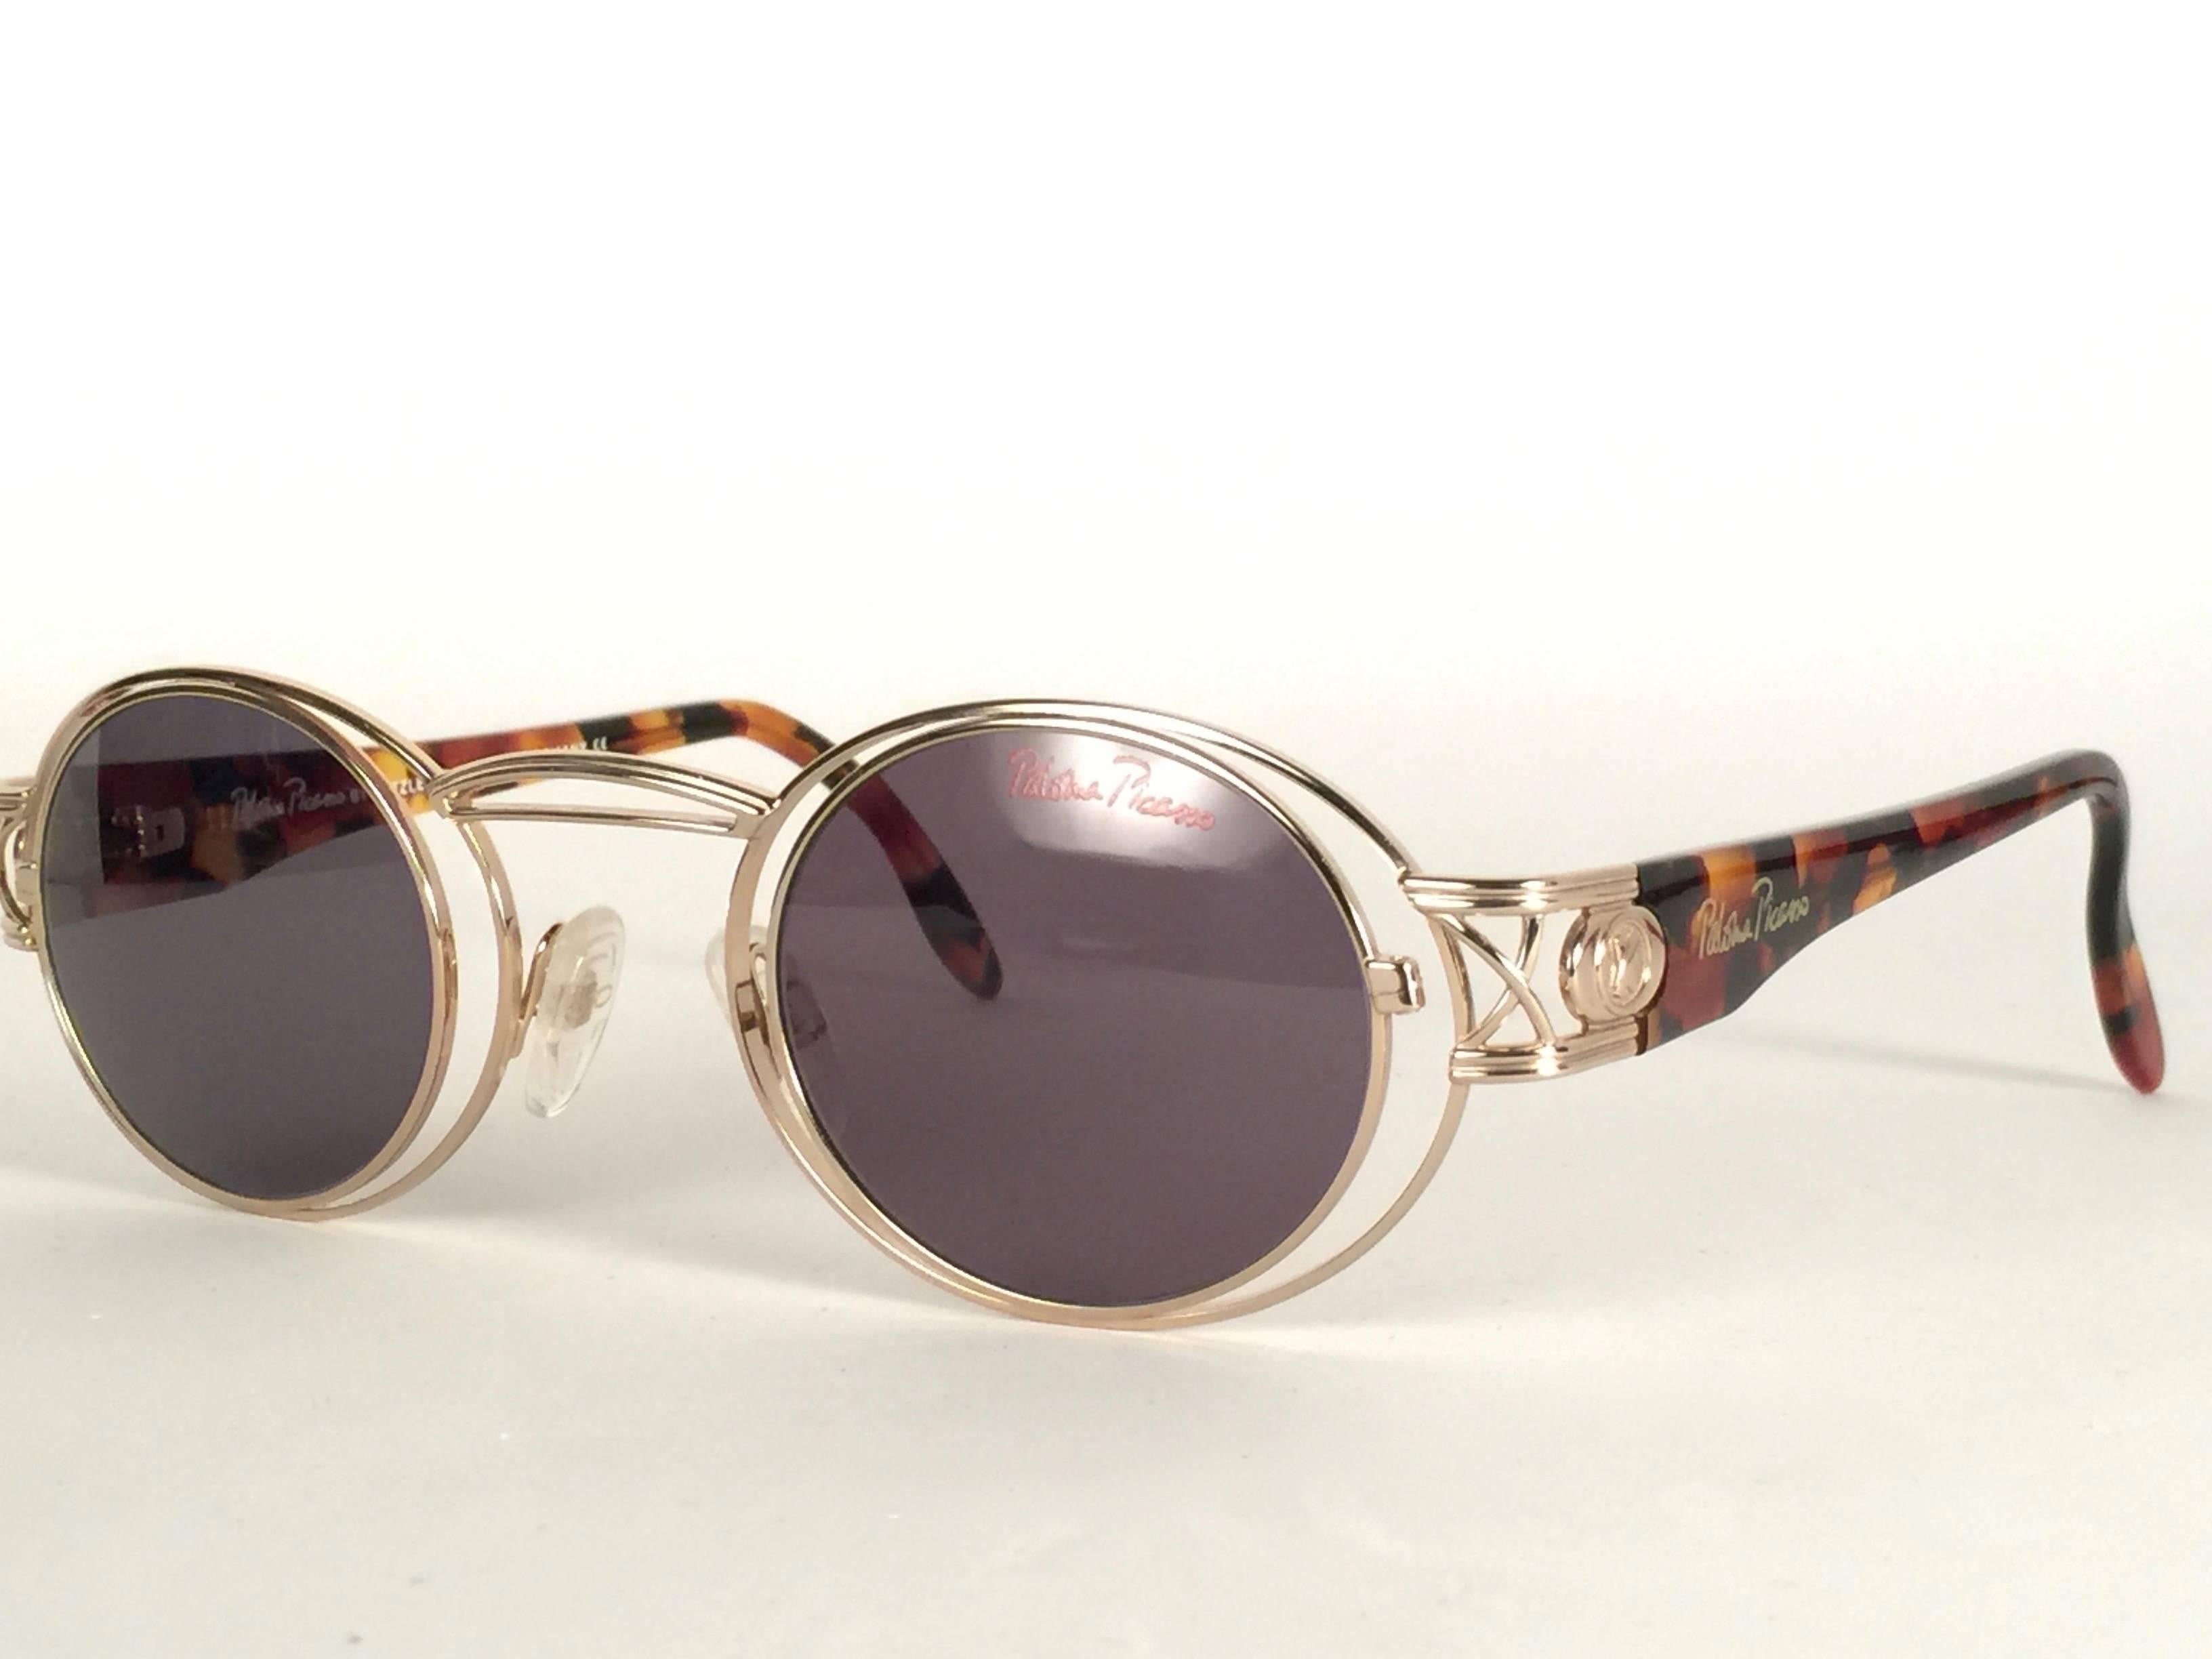 Mint Vintage Paloma Picasso gold and tortoise Sunglasses By Metzler Made in Germany 1980's. 

Frame with minor wear and tarnish due to storage. 

Made in Germany.

